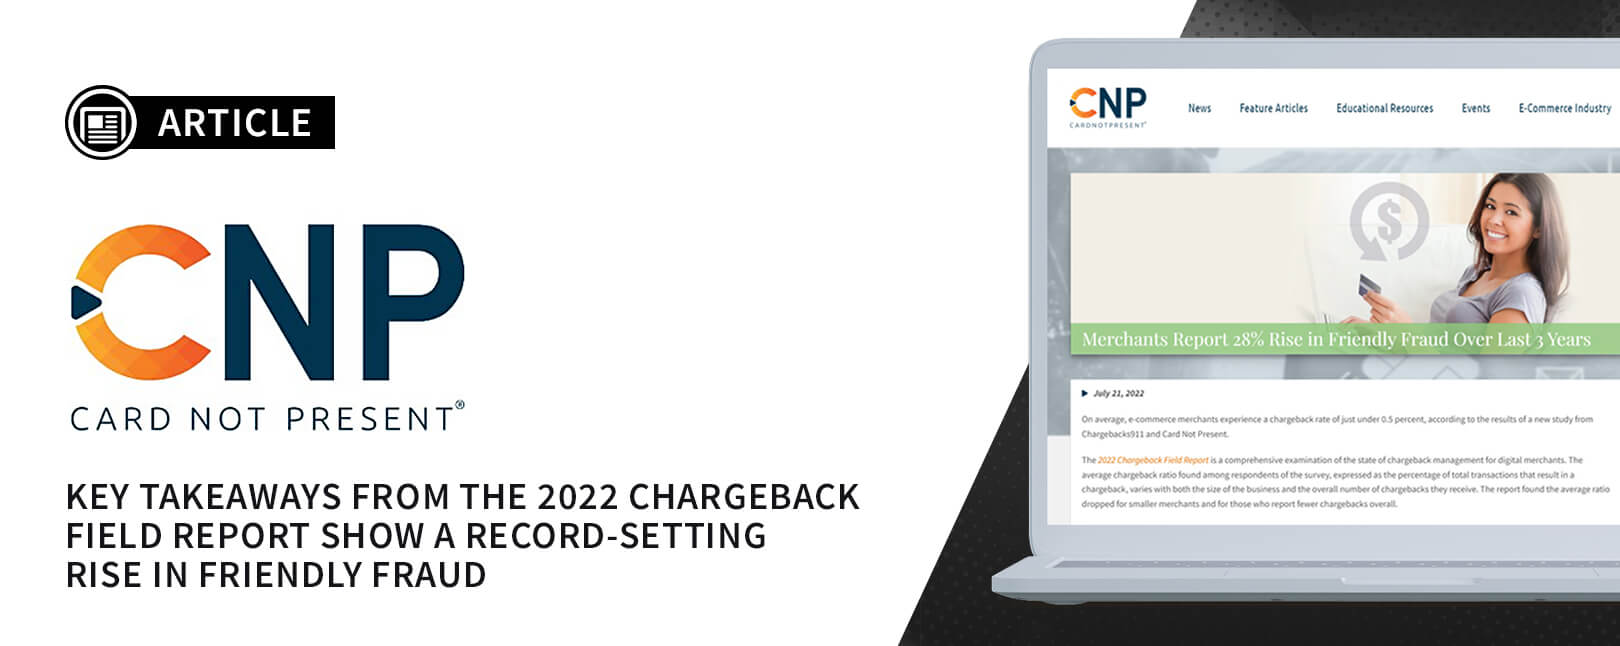 Chargebacks911® Report Analyzed by Card Not Present